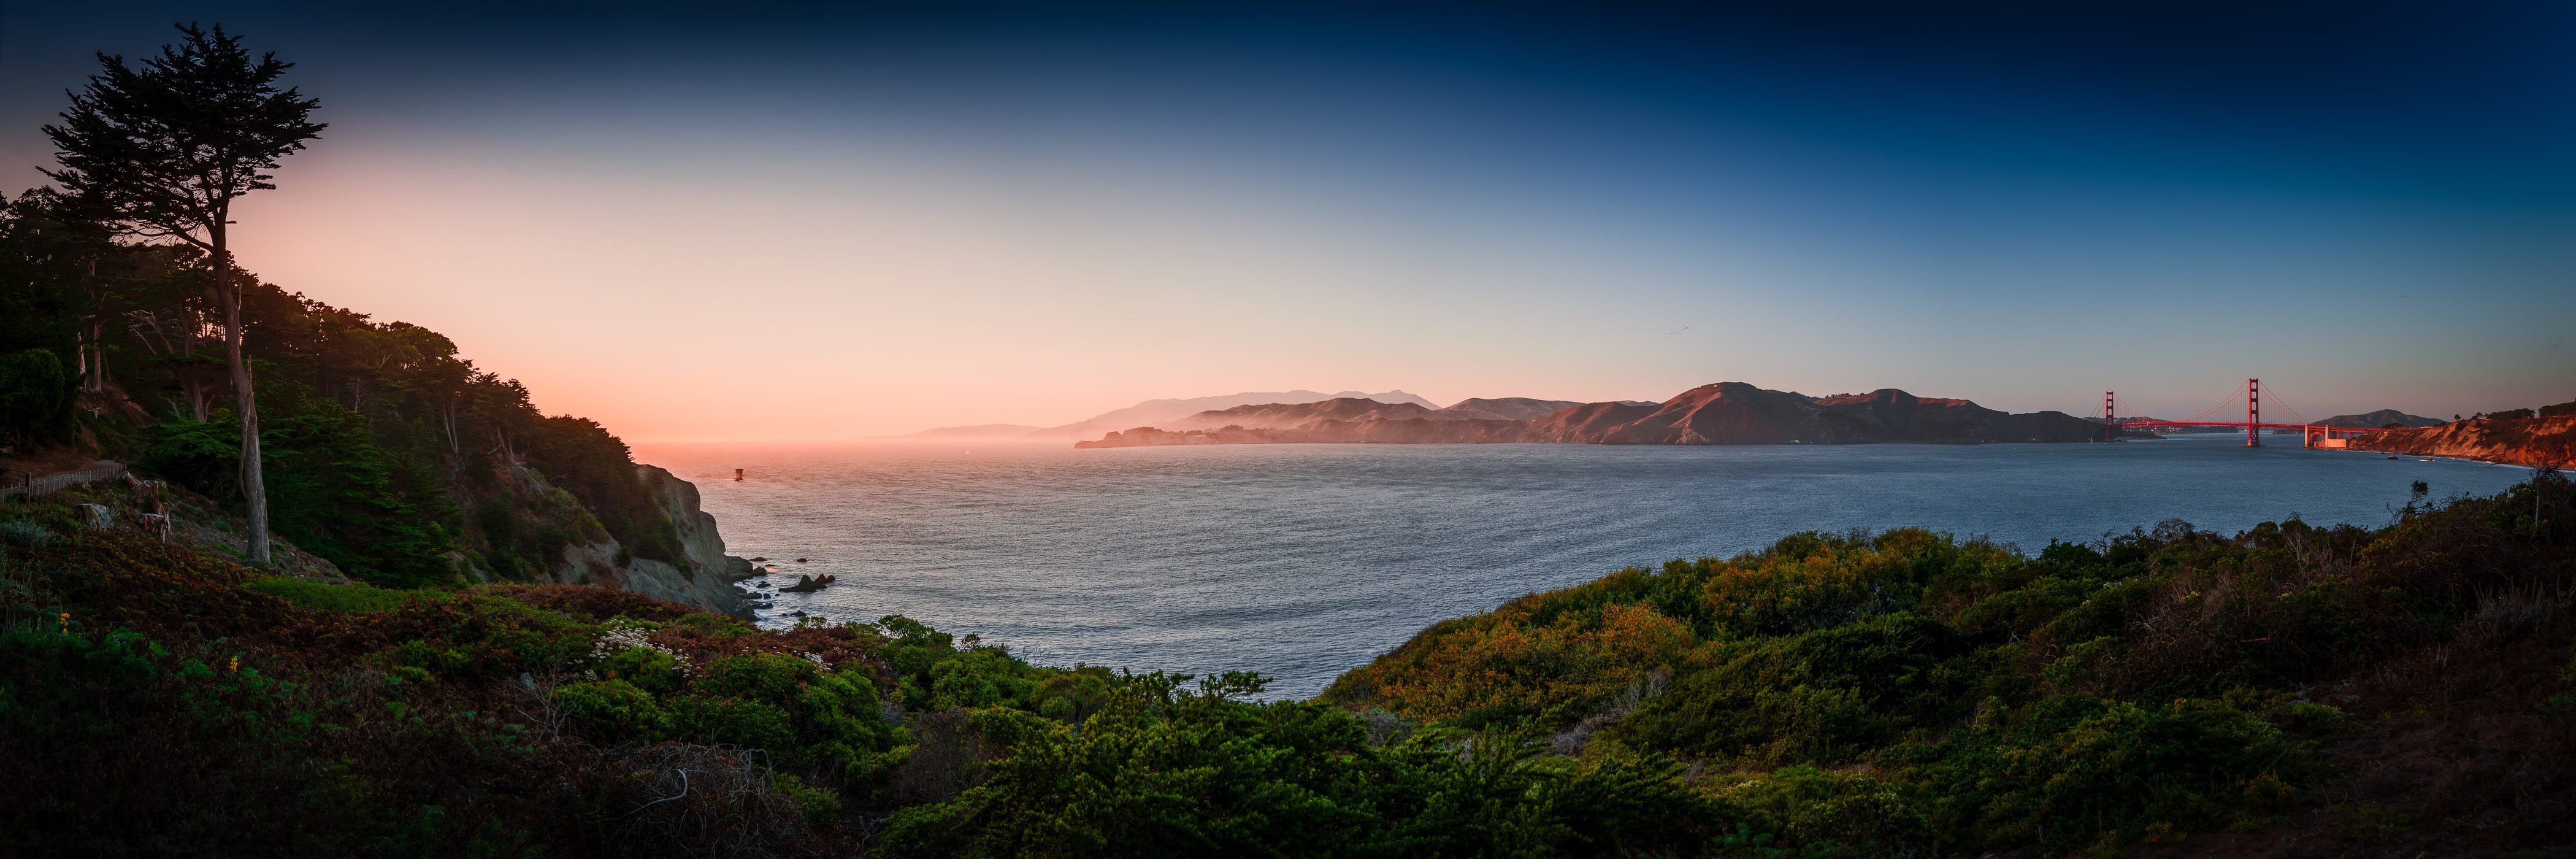 The sun sets on the Golden Gate—the narrow strait between San Francisco and the Marin Headlands that connects San Francisco Bay with the Pacific Ocean.